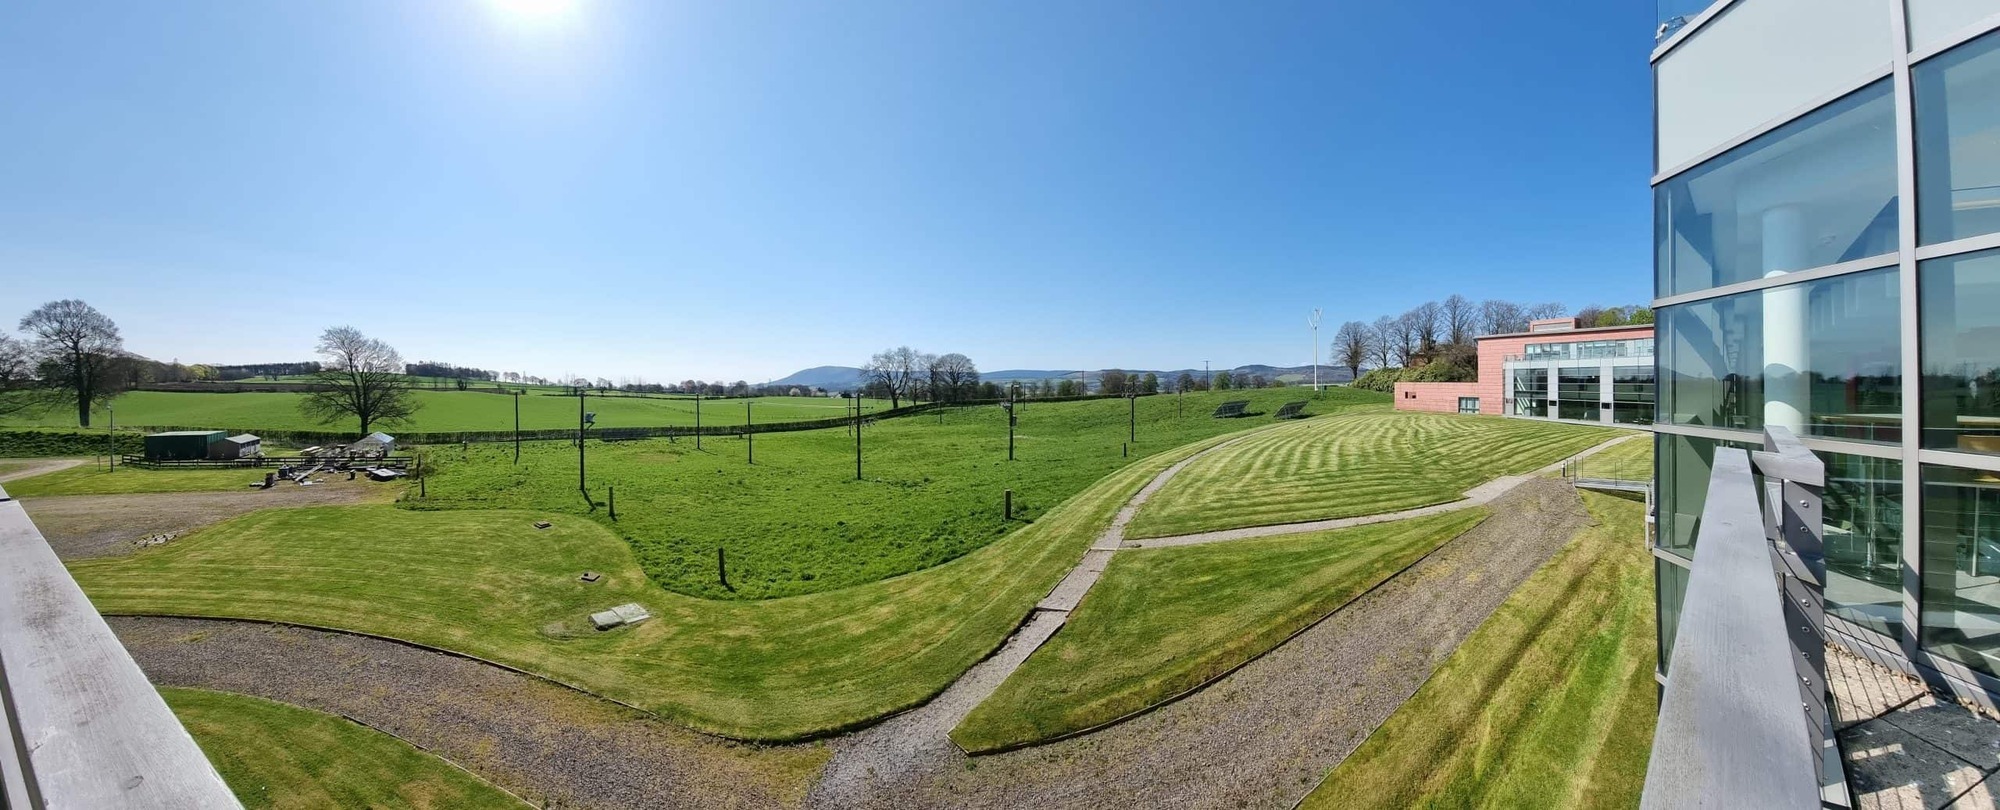 Wide photograph of the back of Dumfries Campus